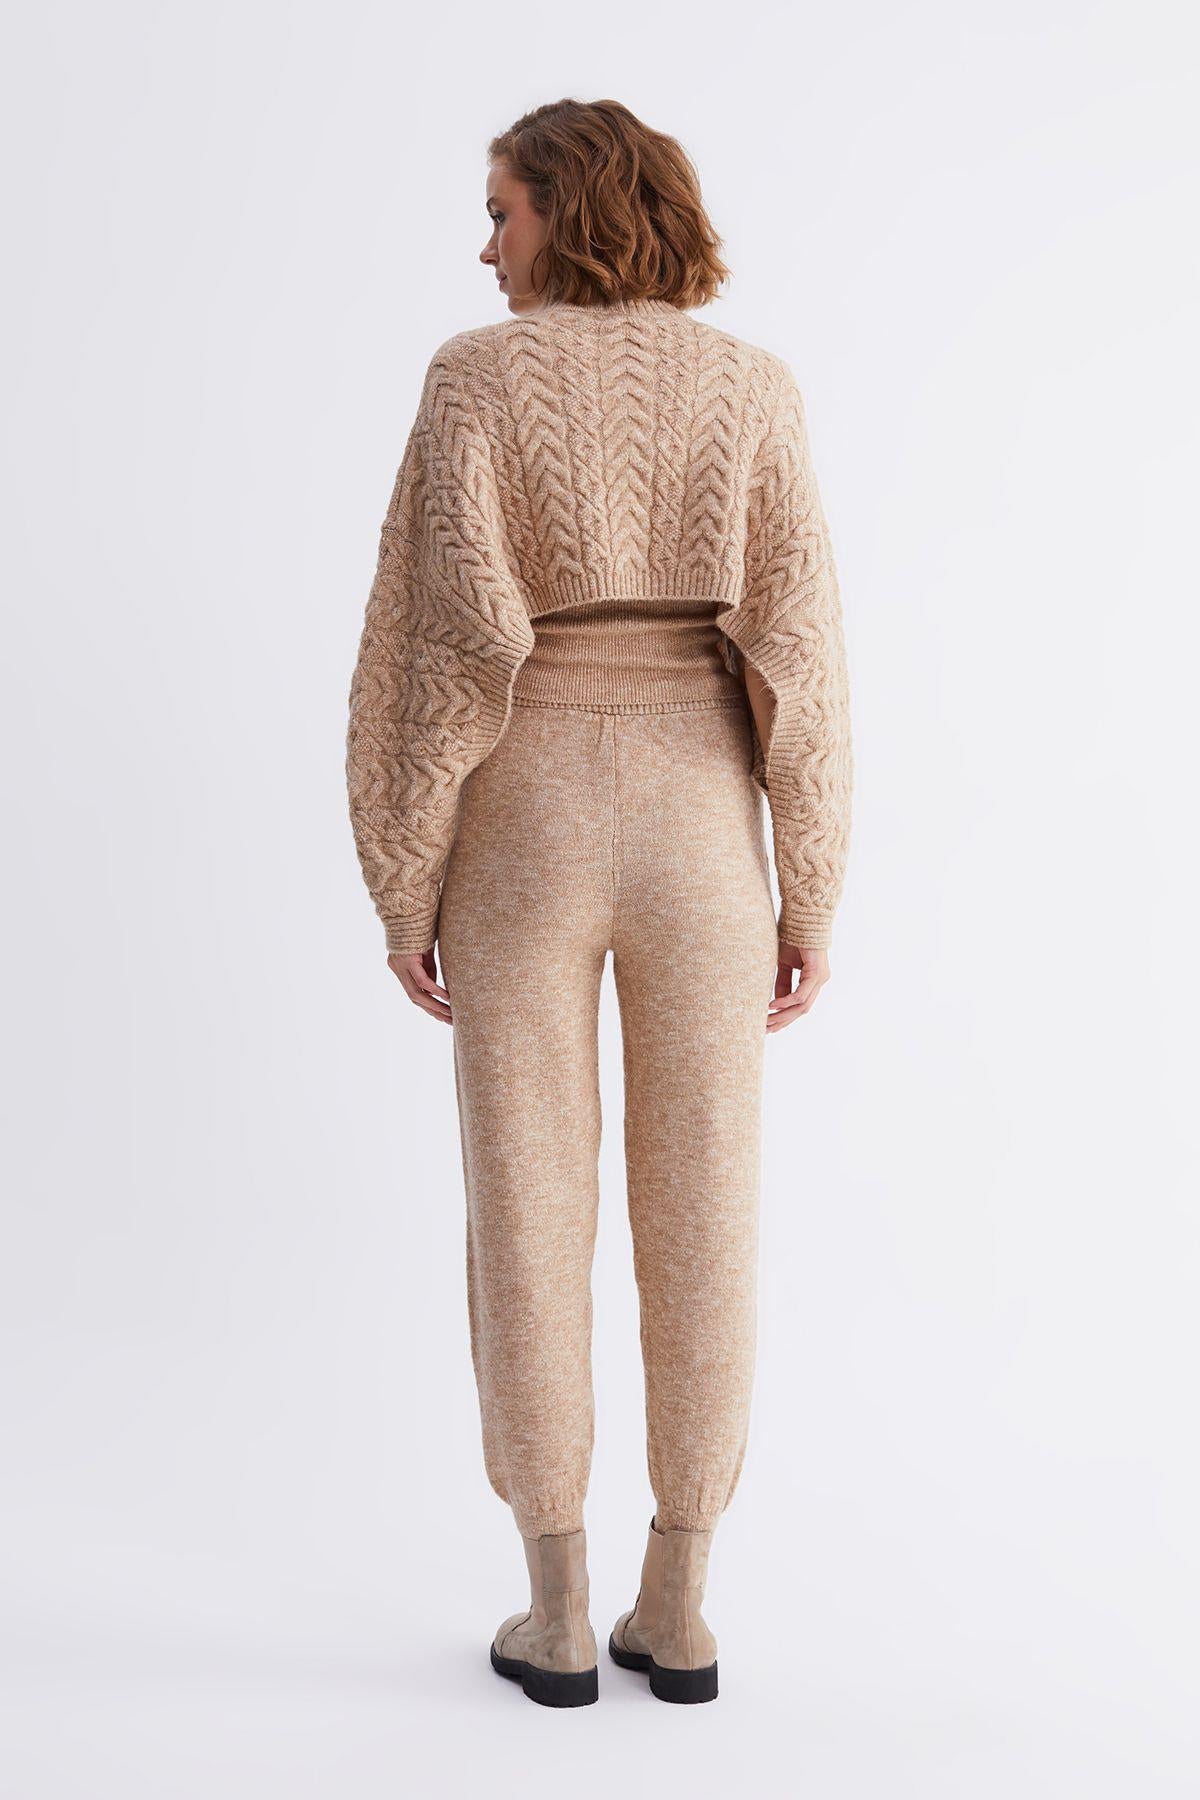 Cable Knit Brown Knitwear Crop